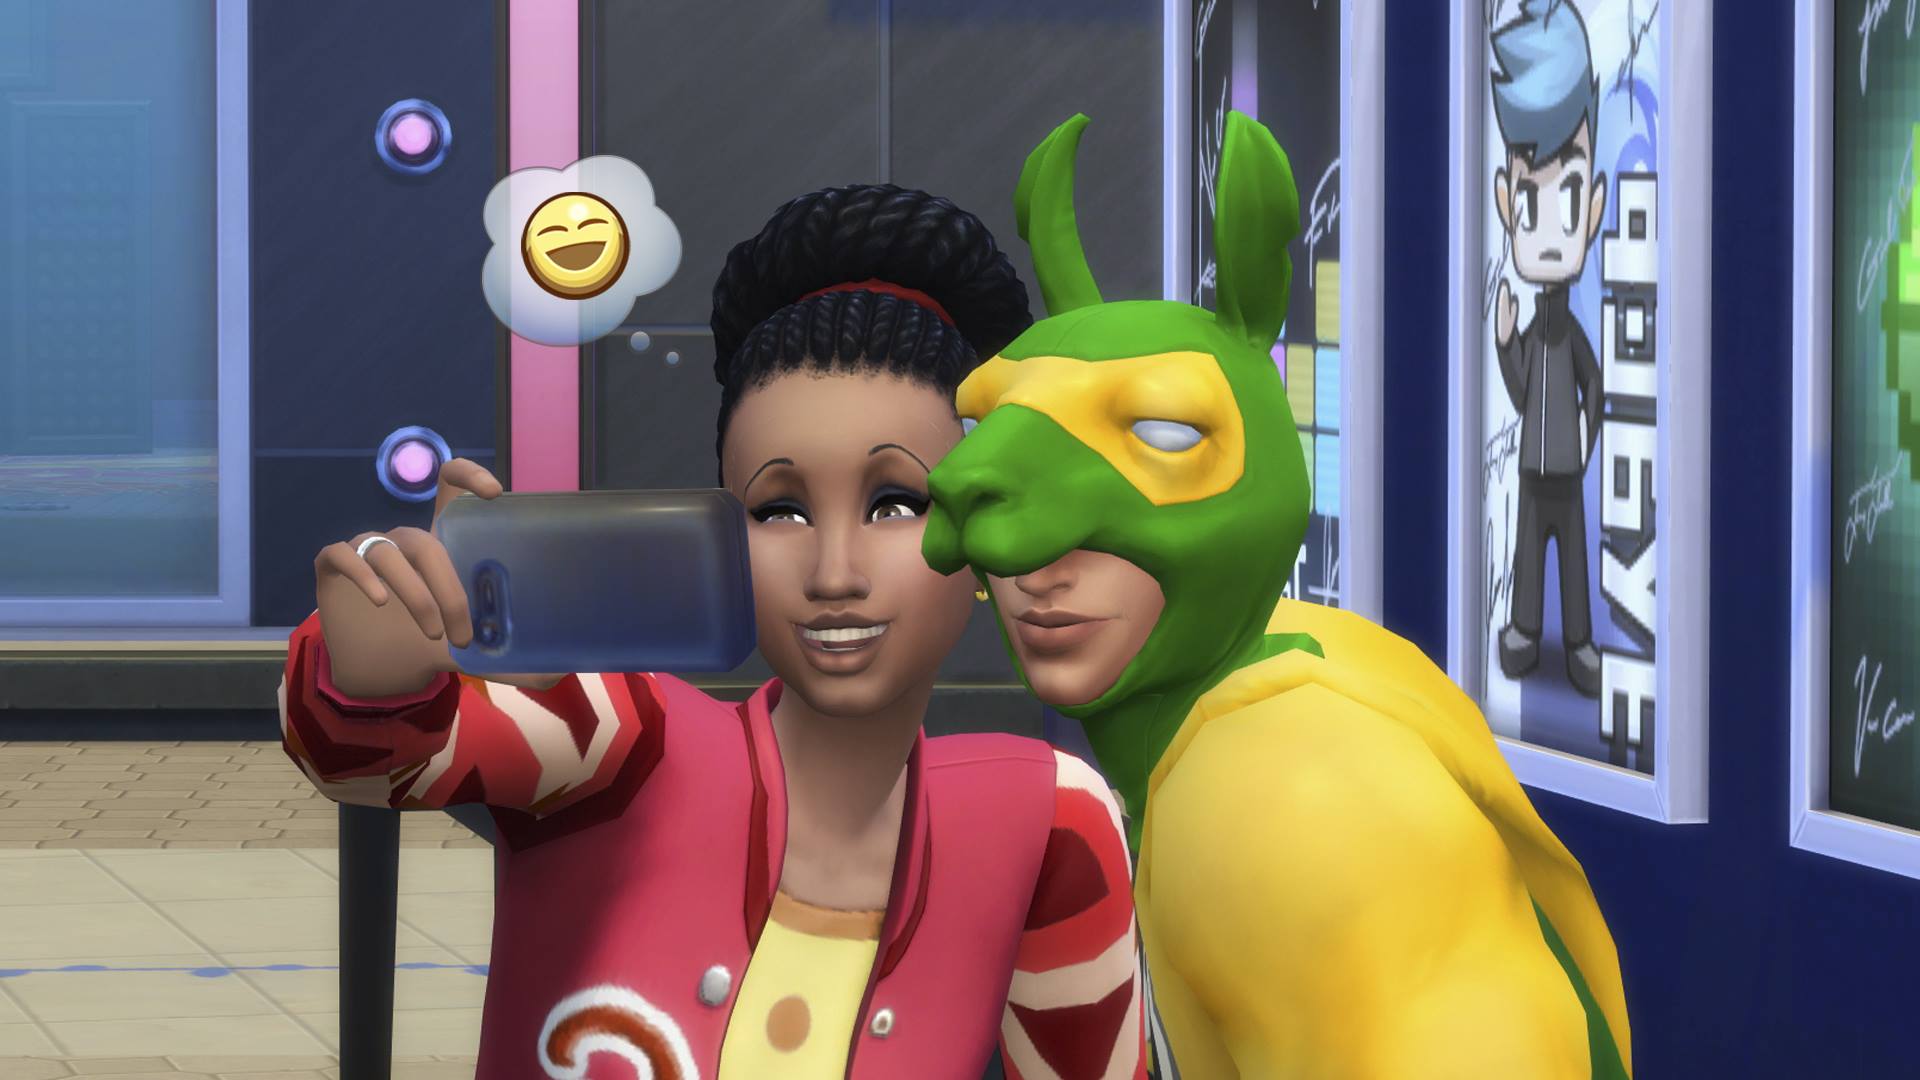 Free packs in the Sims4 because of covid-19